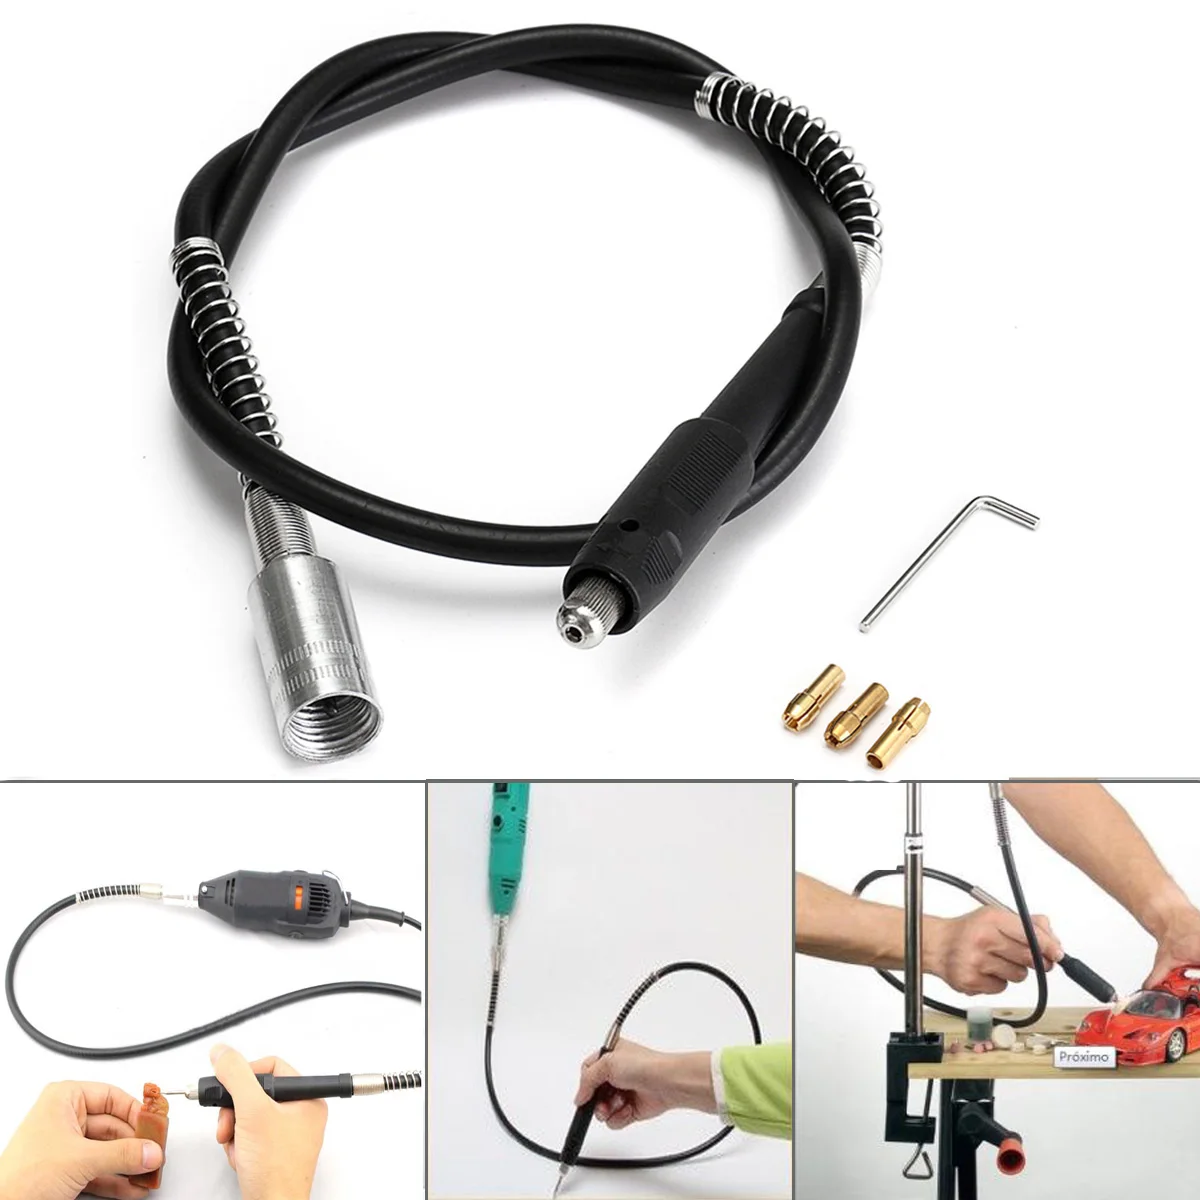 

42'' 107cm Corded Electric Flexible Shaft For Power Rotary Tools Accessories M19x2 interface size